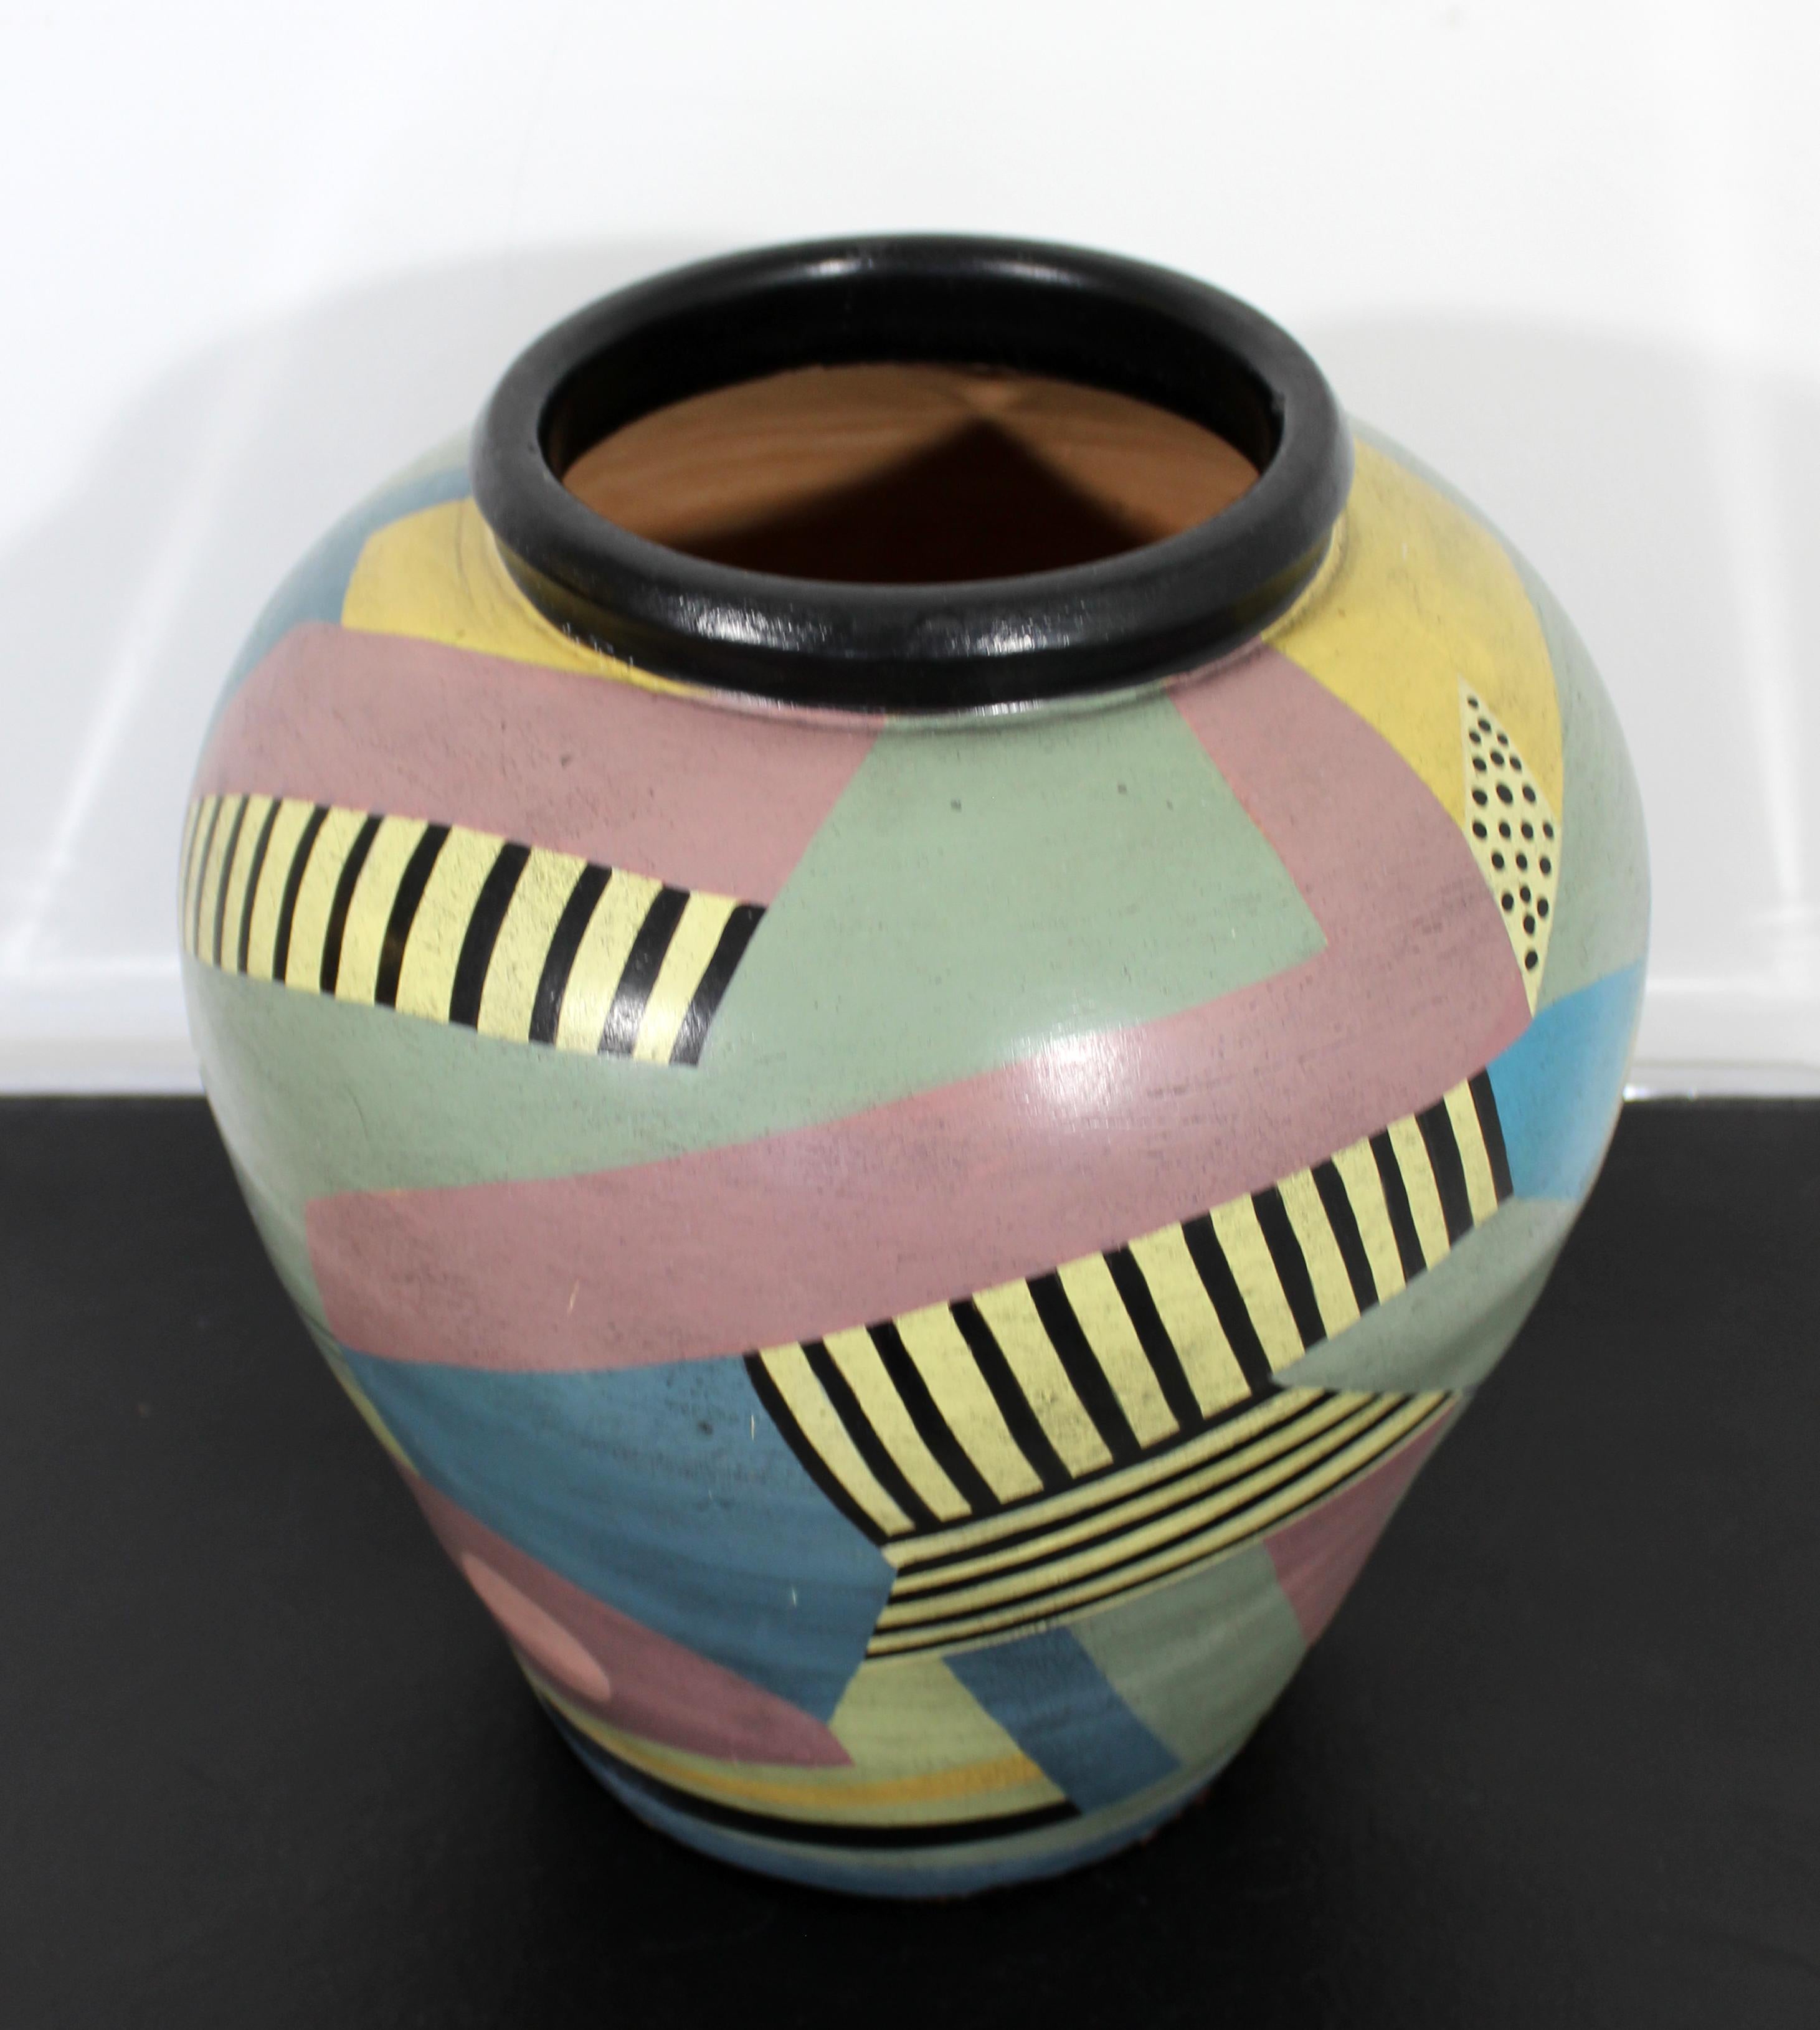 For your consideration is a marvelous, Memphis style, ceramic art vase or vessel, signed on the inside, circa 1980s. In excellent condition. The dimensions are 13